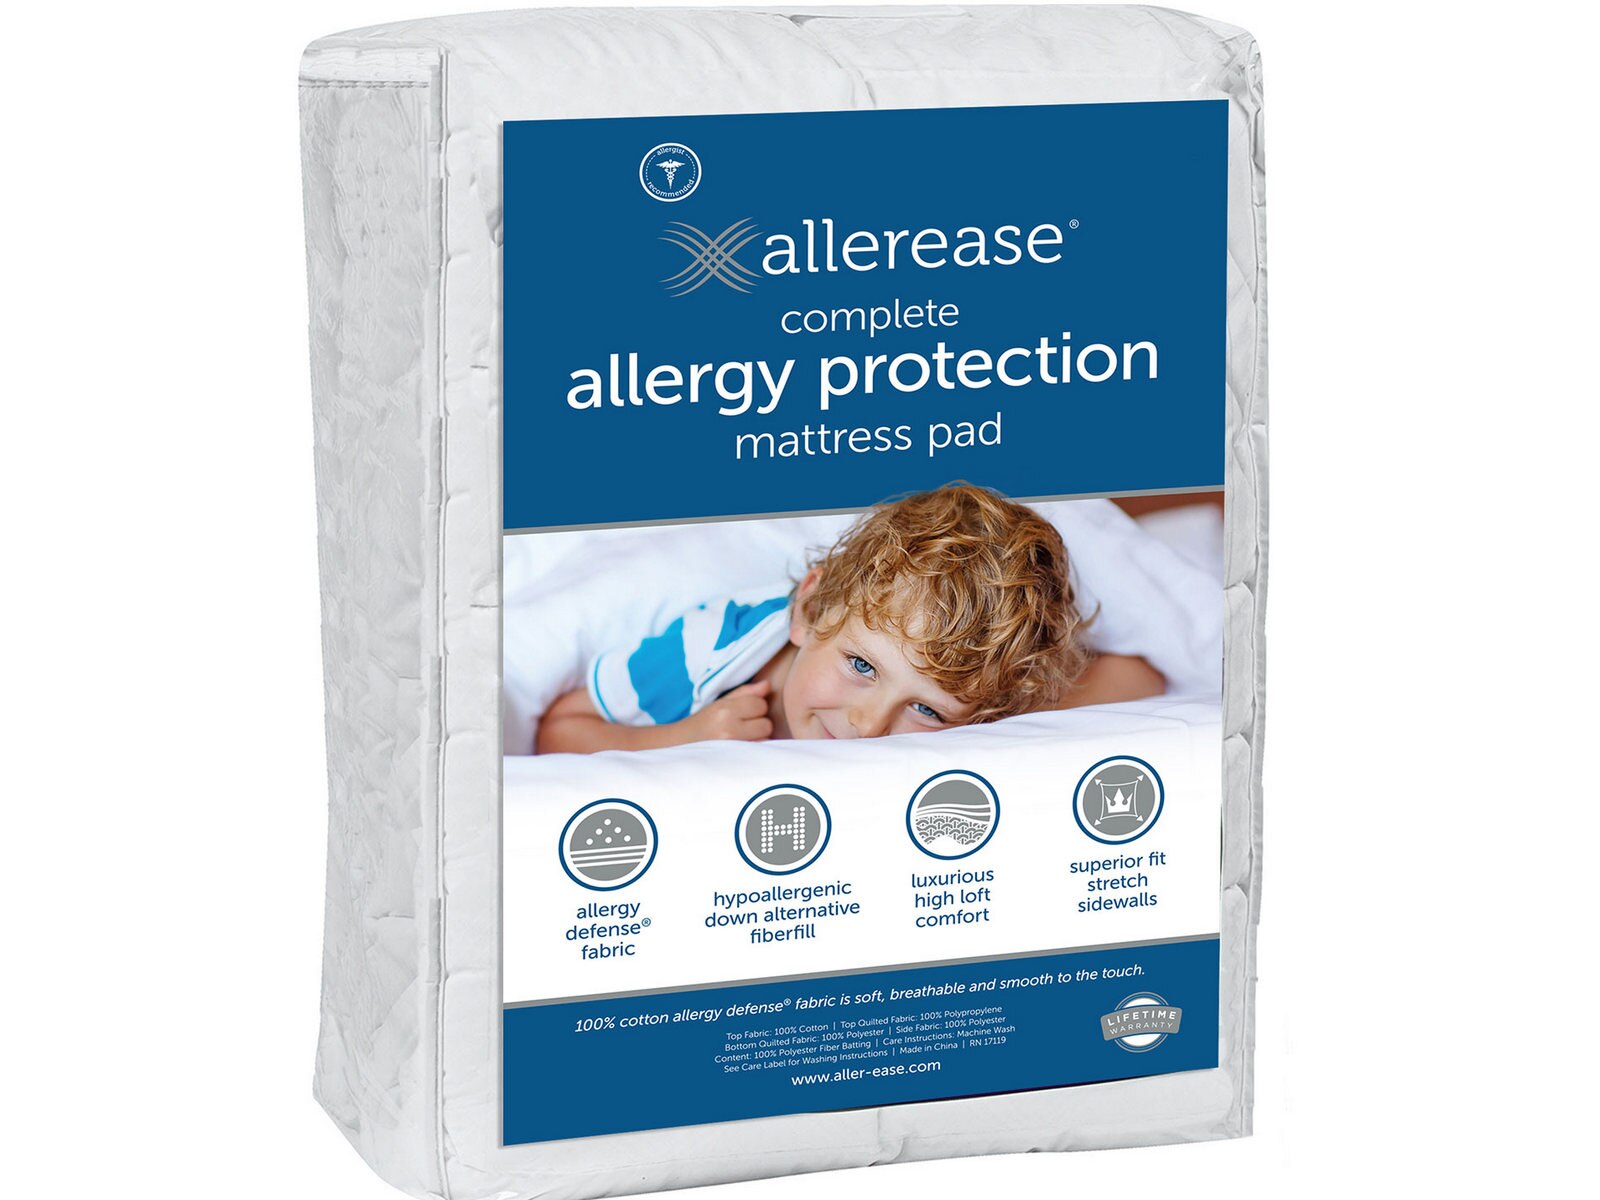 allerease allergy protection mattress pad